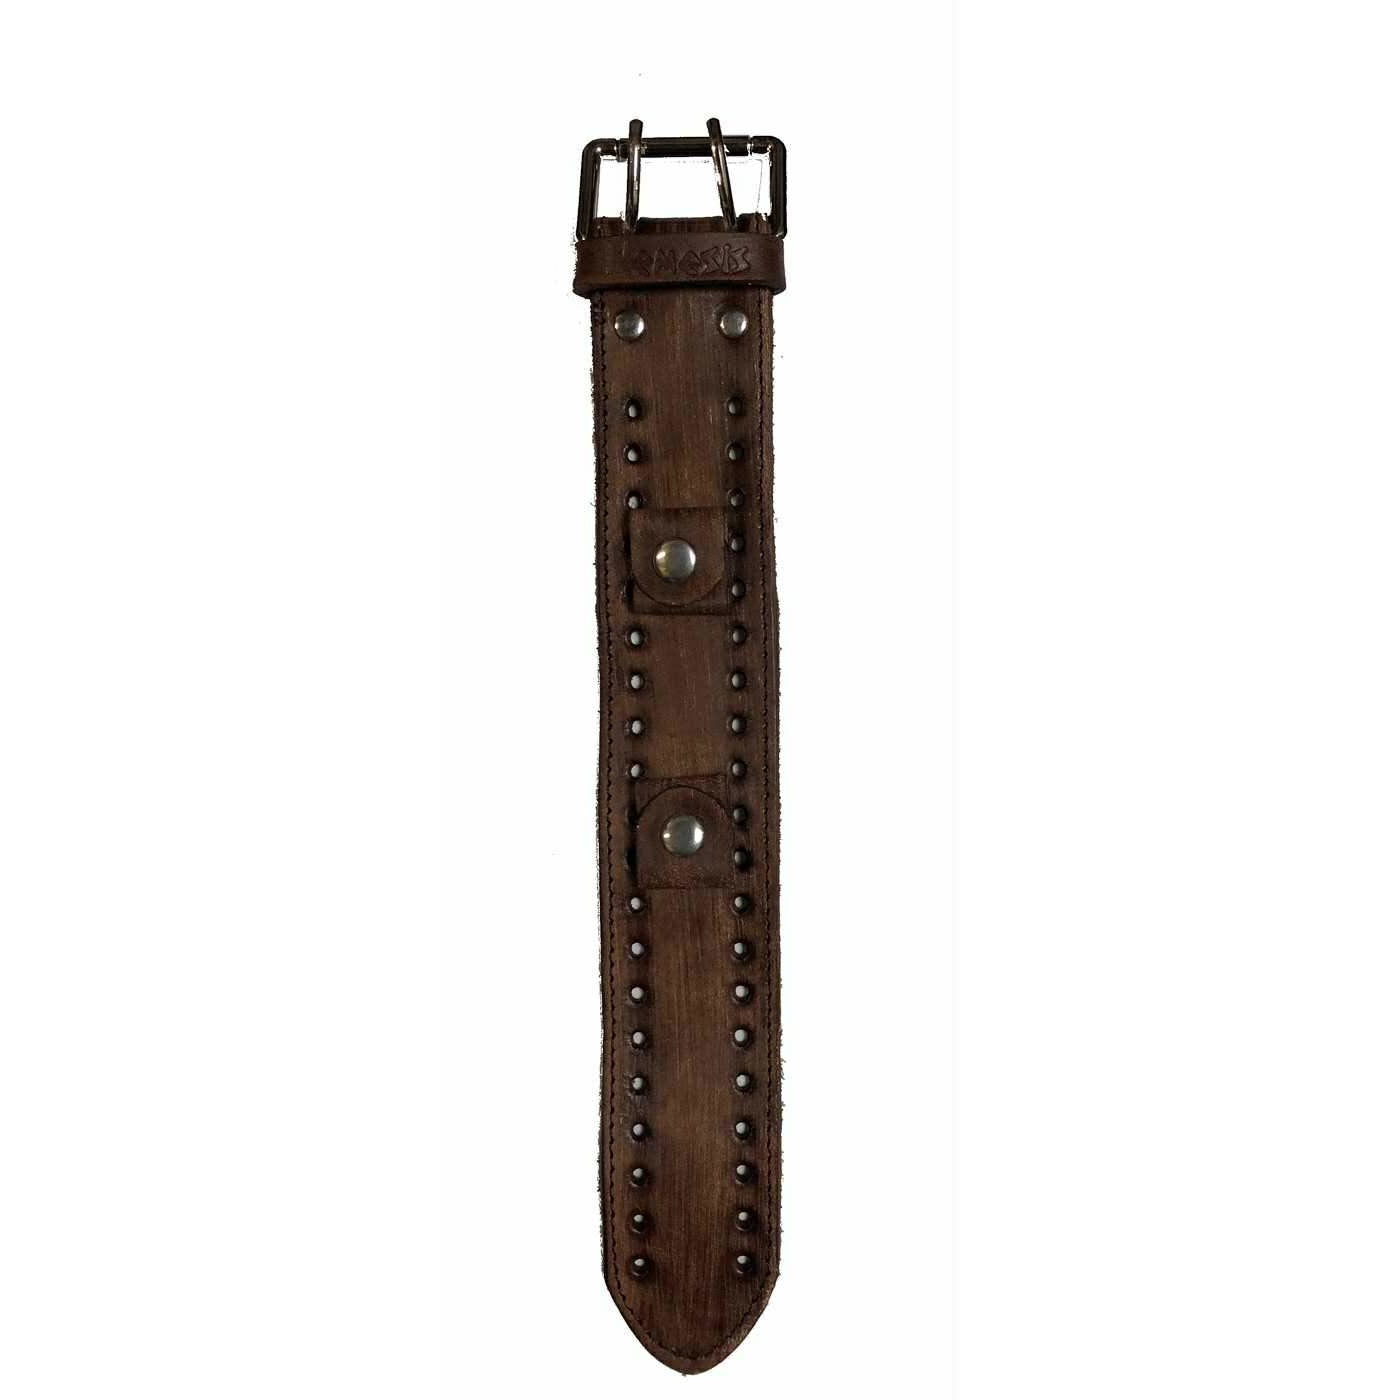 Sporty Racing Brown Watch with Stitched Perforated Distressed Brown Leather Cuff